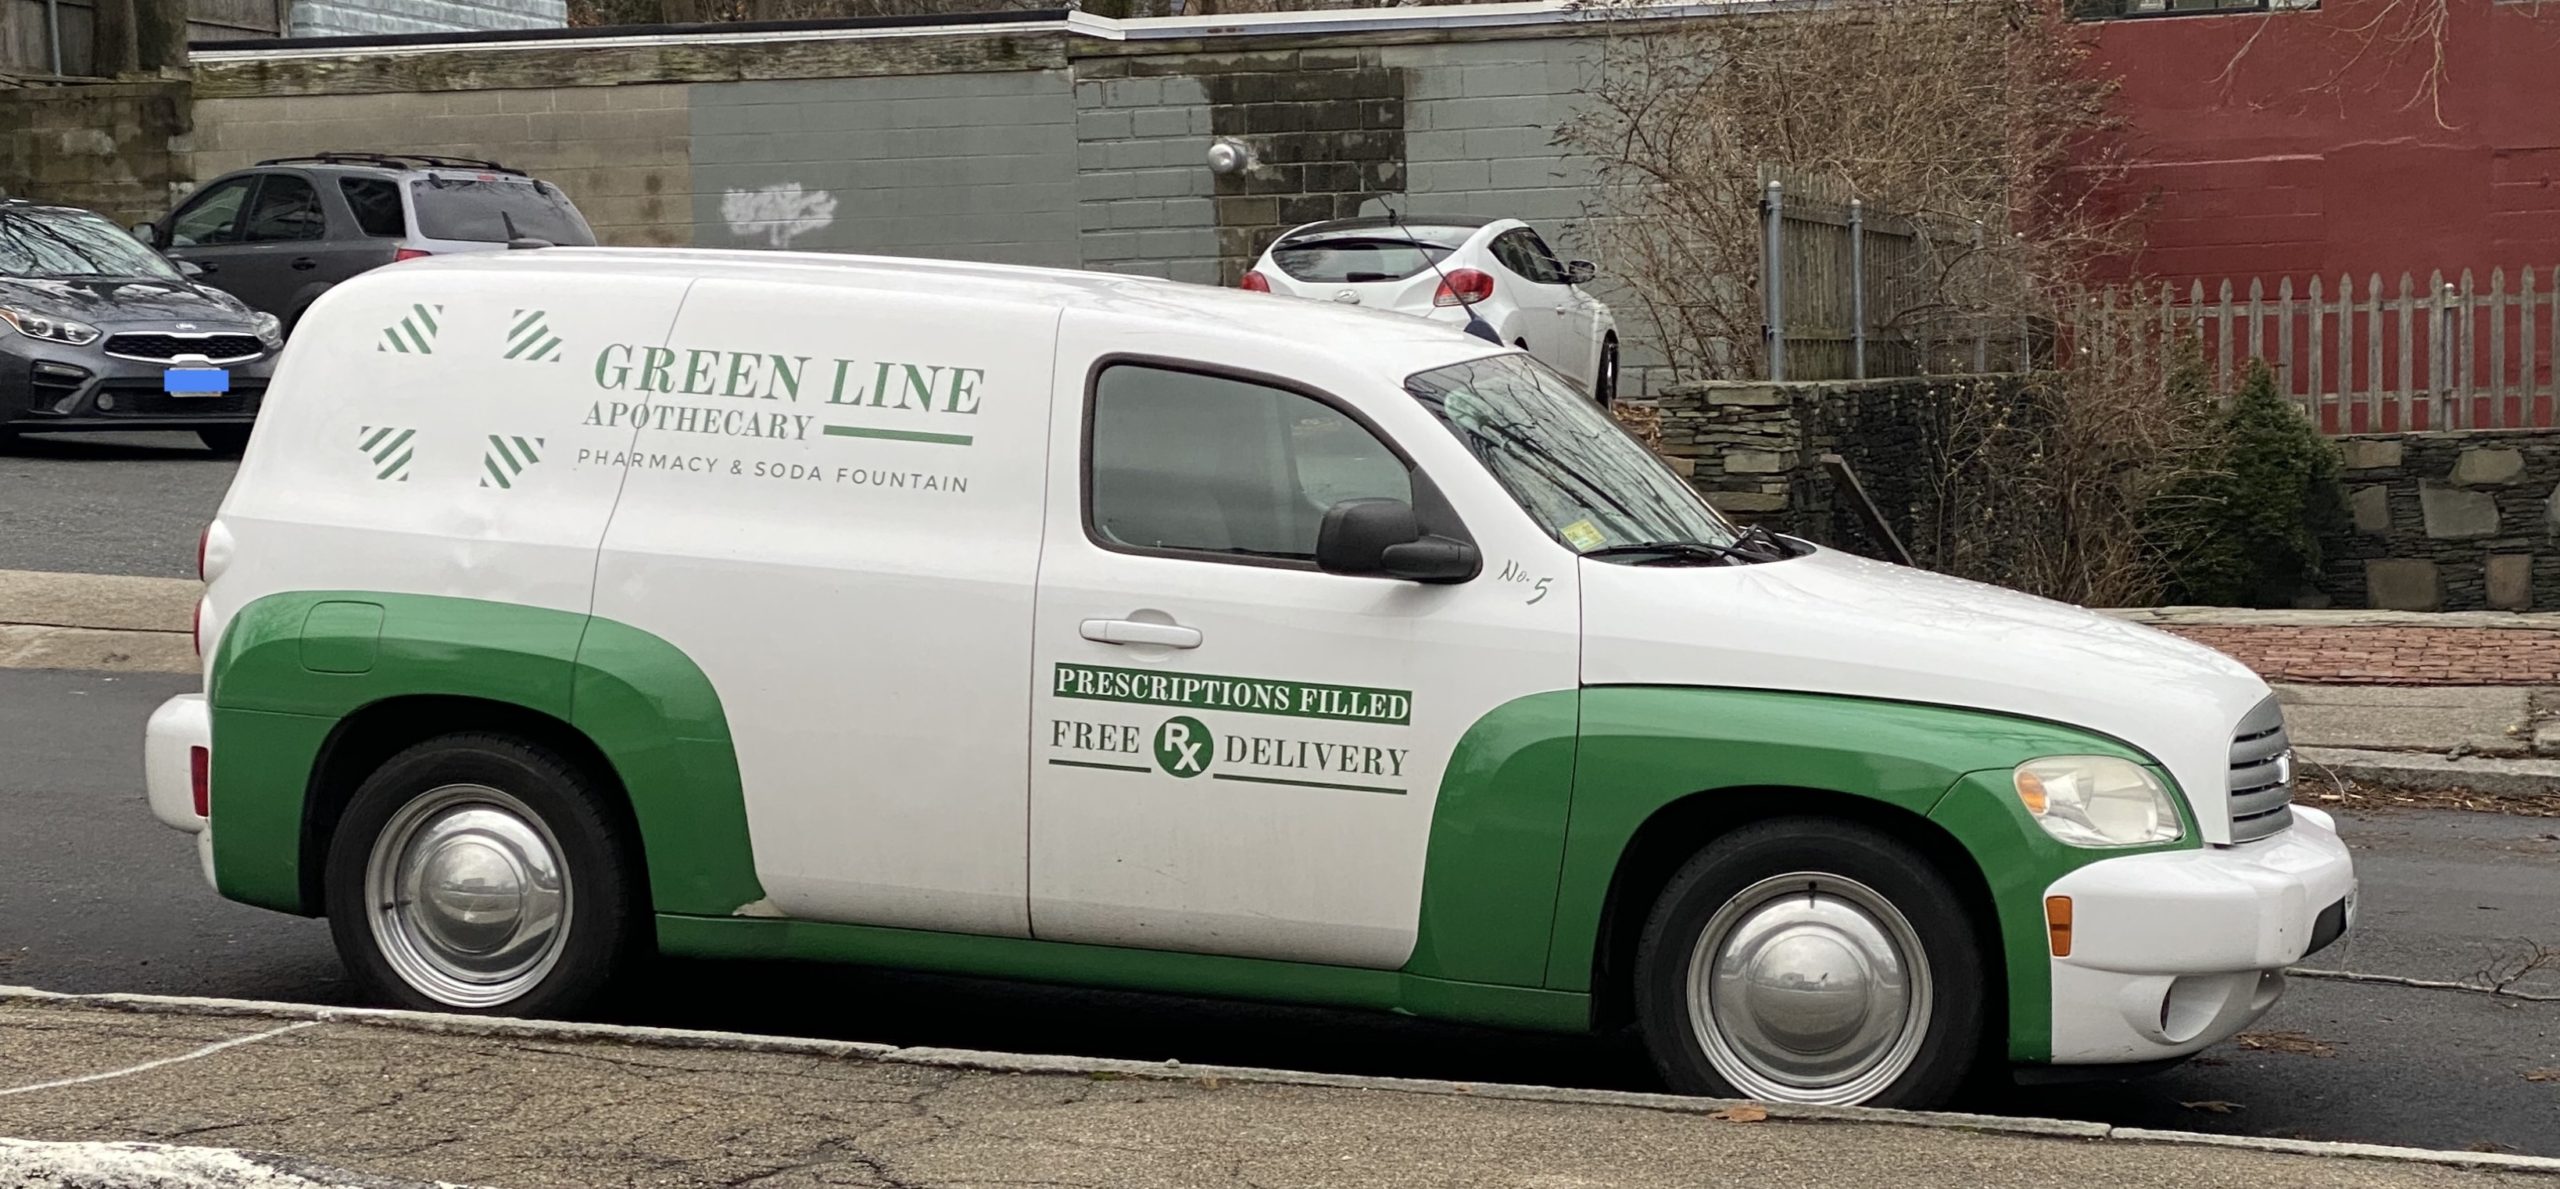 Here's the delivery van for local prescriptions from Green Line Apothecary.